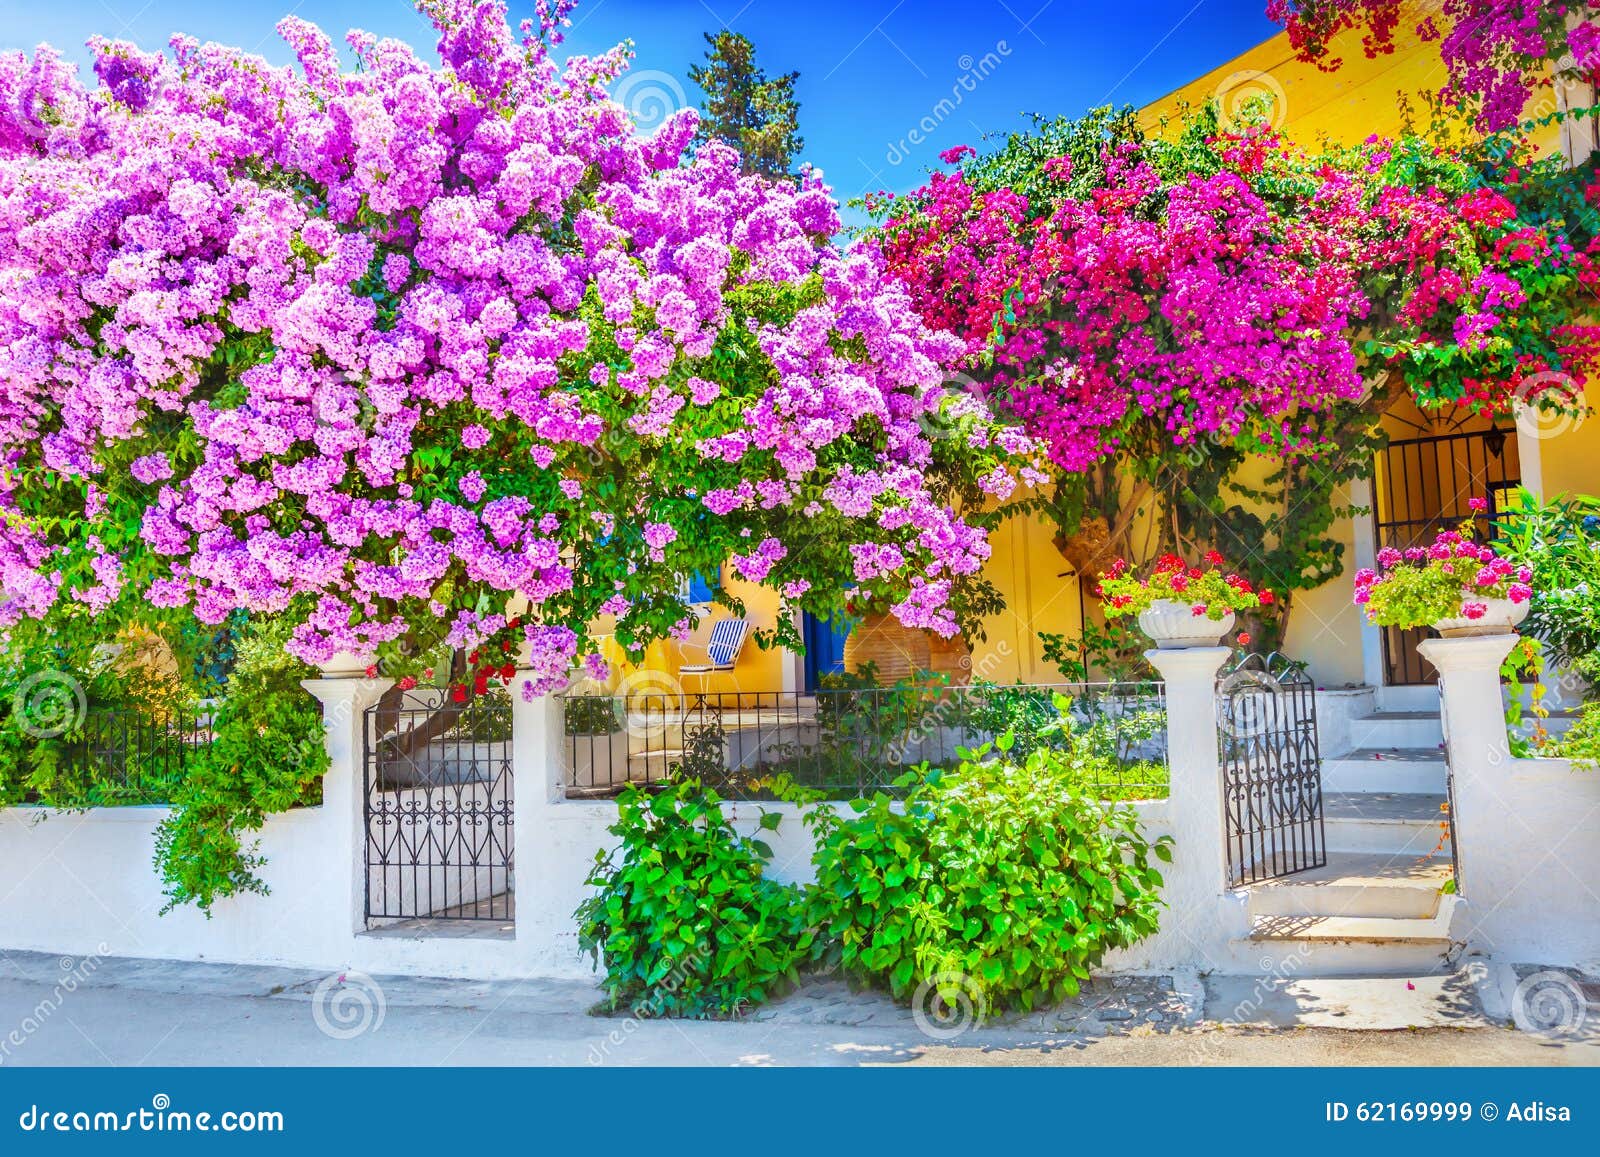 house with bougainvillea